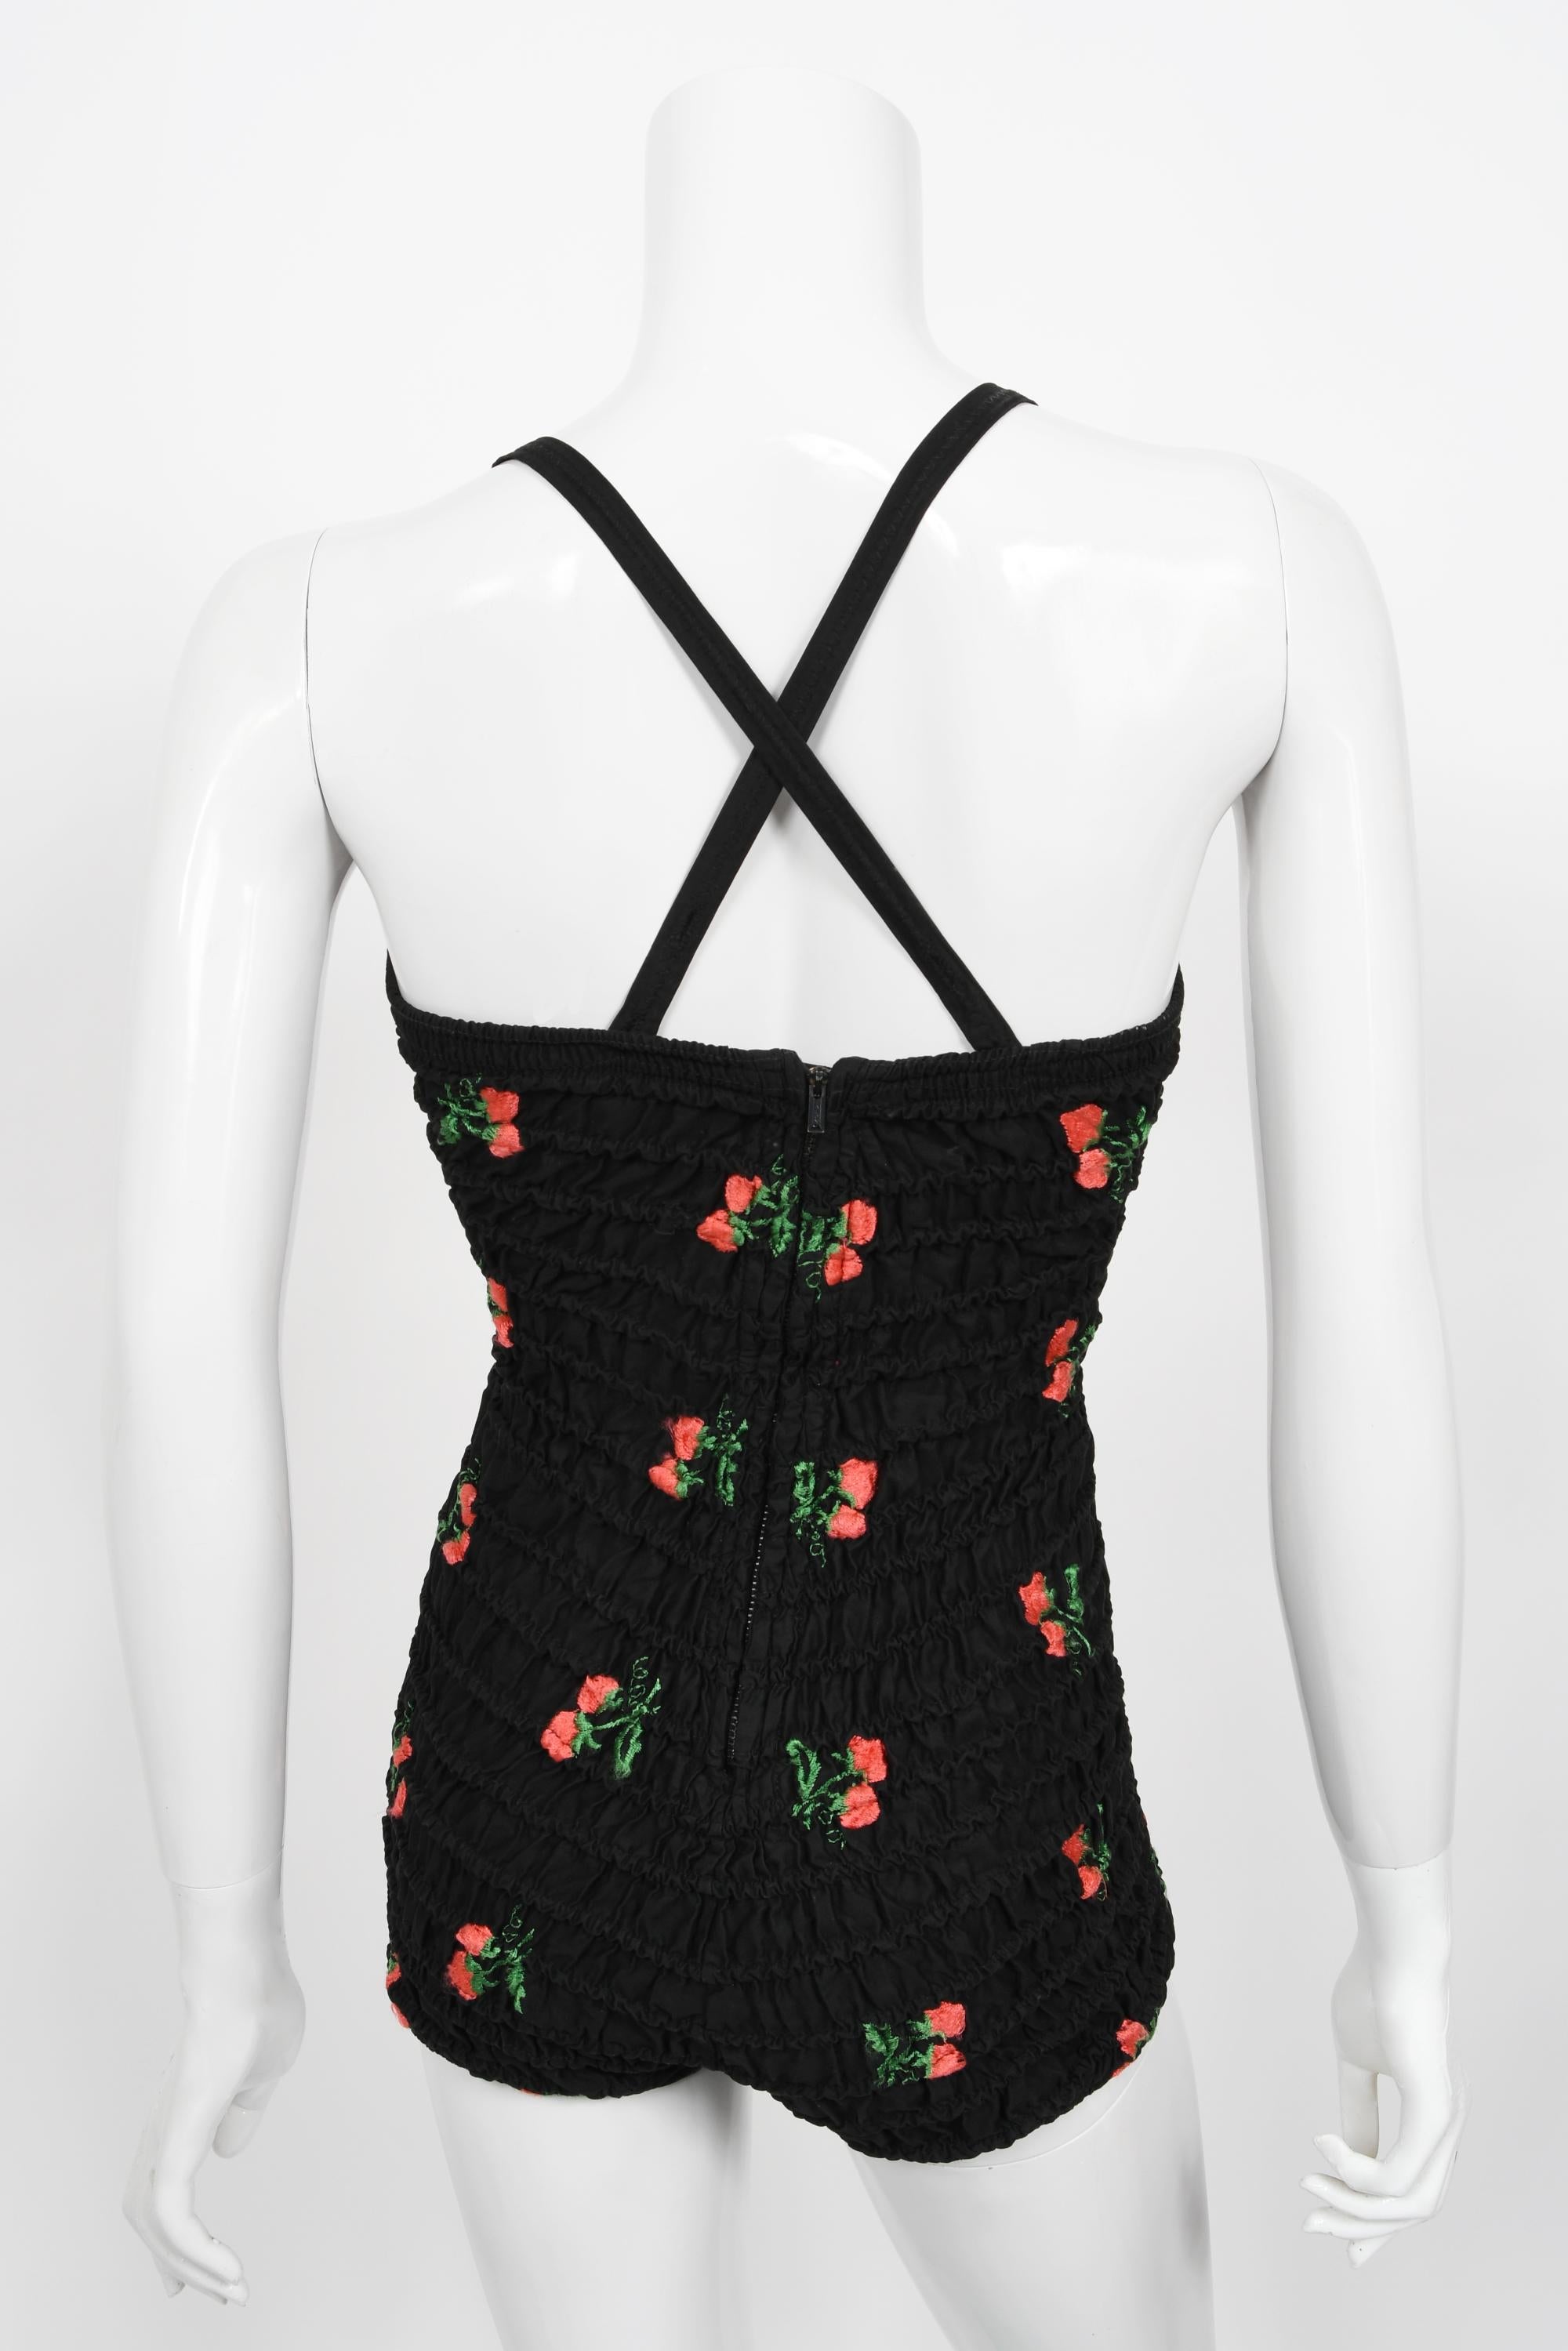 Vintage 1950's Jantzen Embroidered Strawberries Swimsuit & Terry-Cloth Cover Up 9